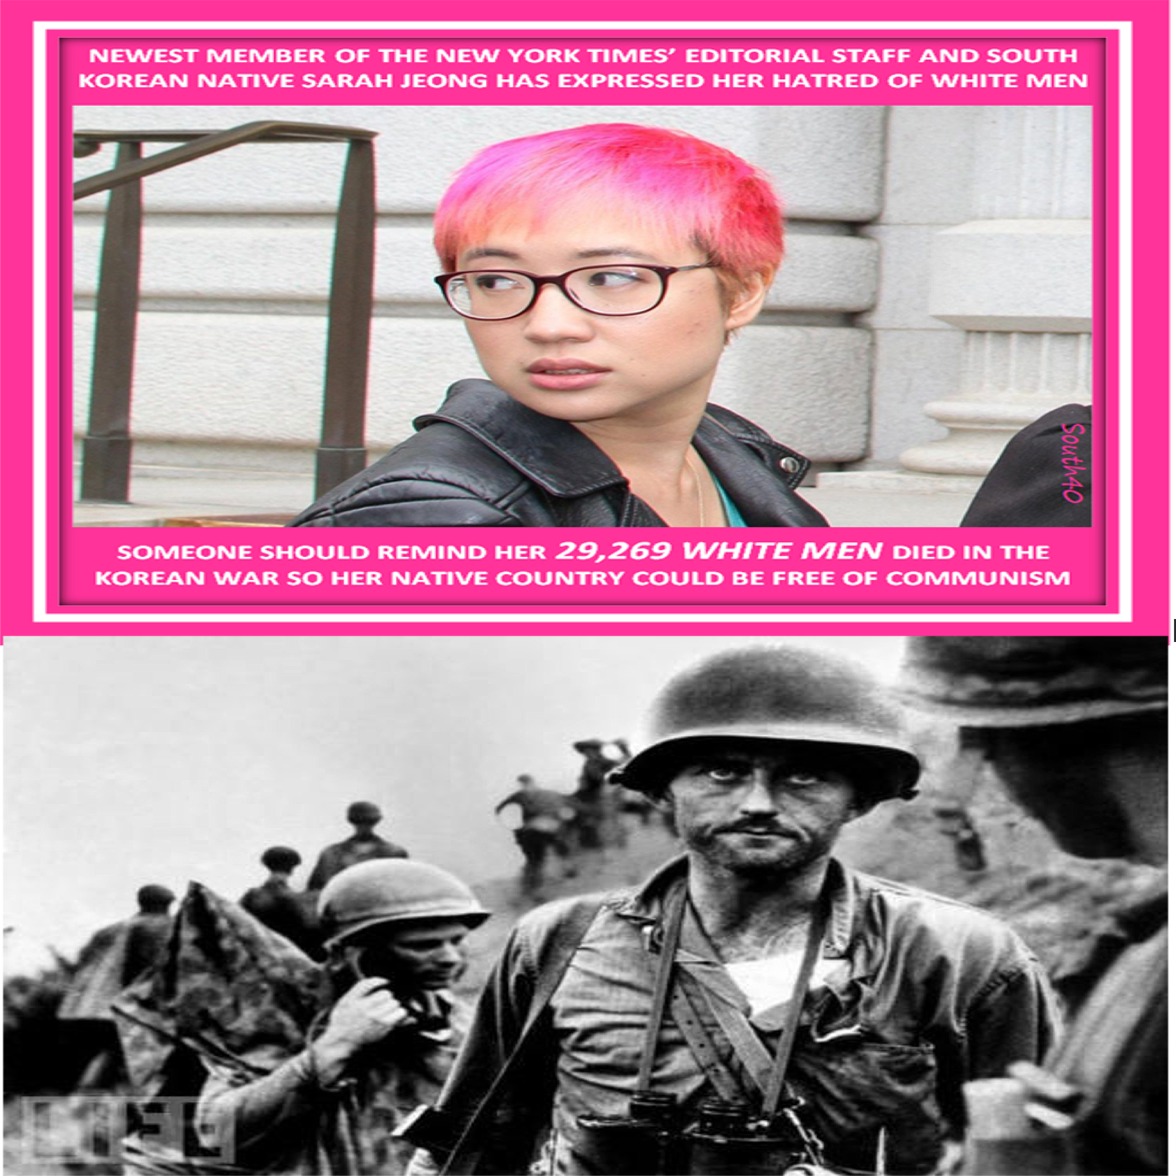 glasses - Newest Member Of The New York Times' Editorial Staff And South Korean Native Sarah Jeong Has Expressed Her Hatred Of White Men Southao Someone Should Remind Her 29,269 White Men Died In The Korean War So Her Native Country Could Be Free Of Commu